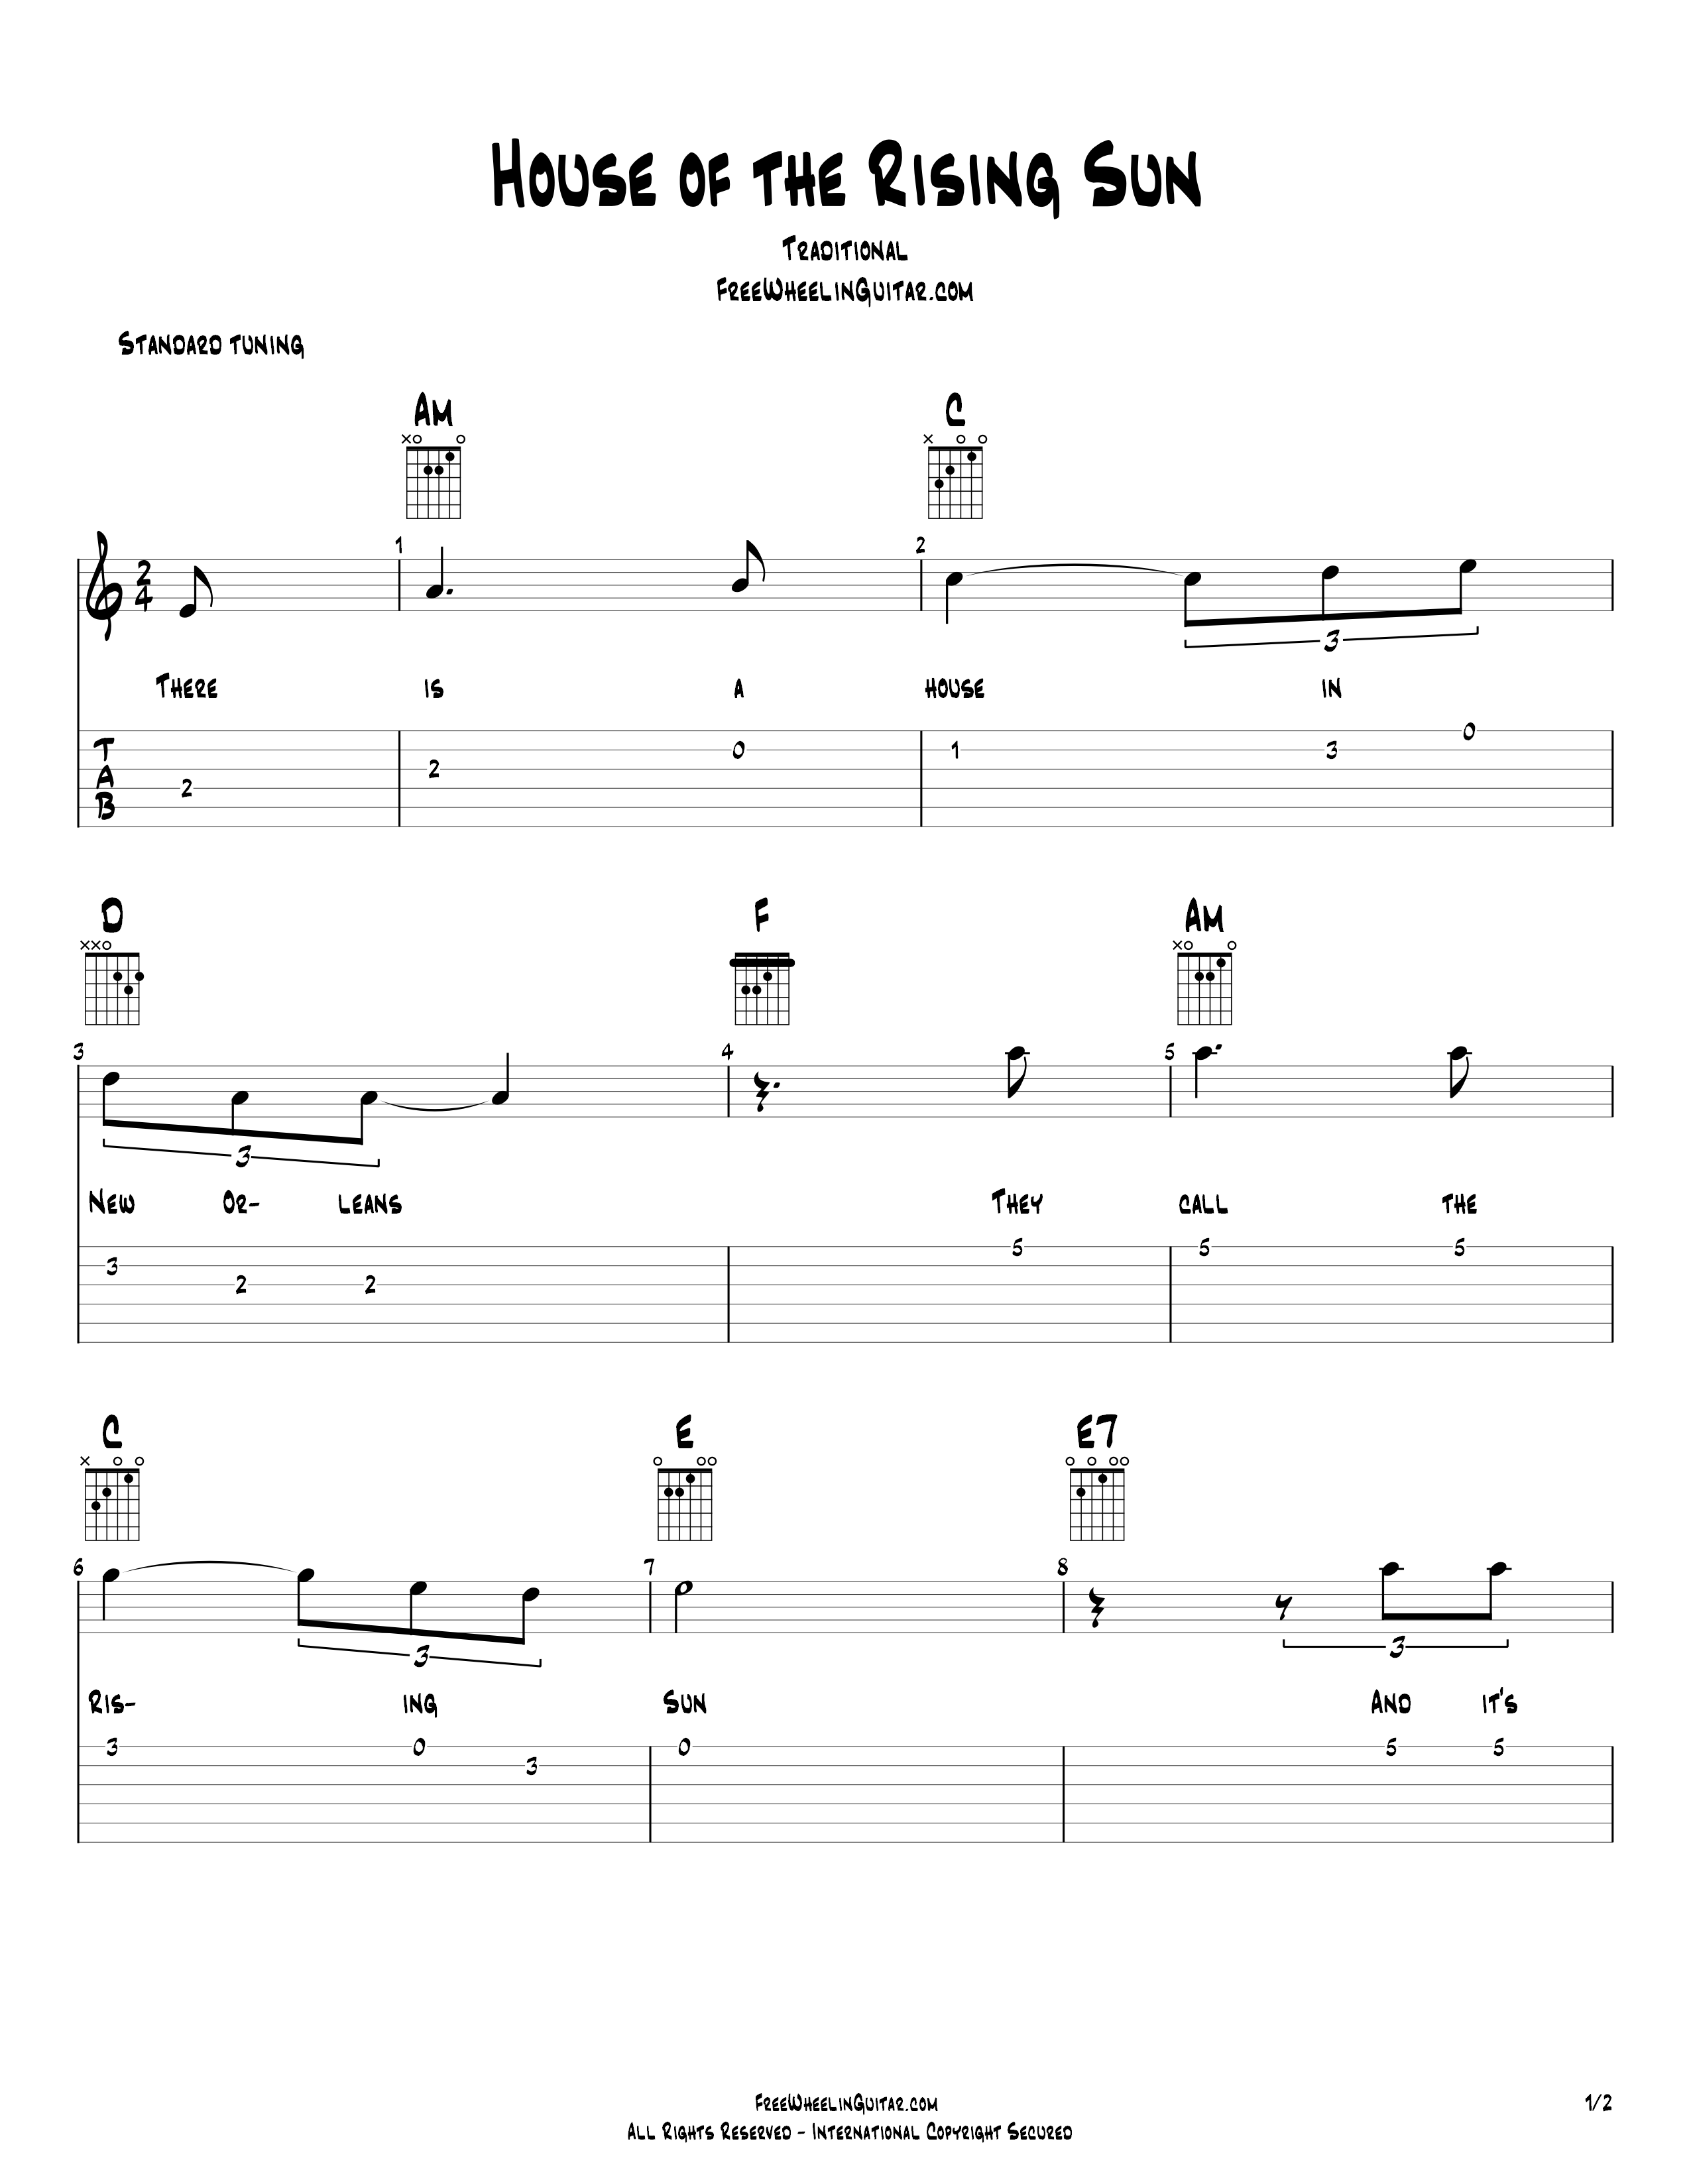 "House of the Rising Sun" Chords and Tab (2 Pages). 